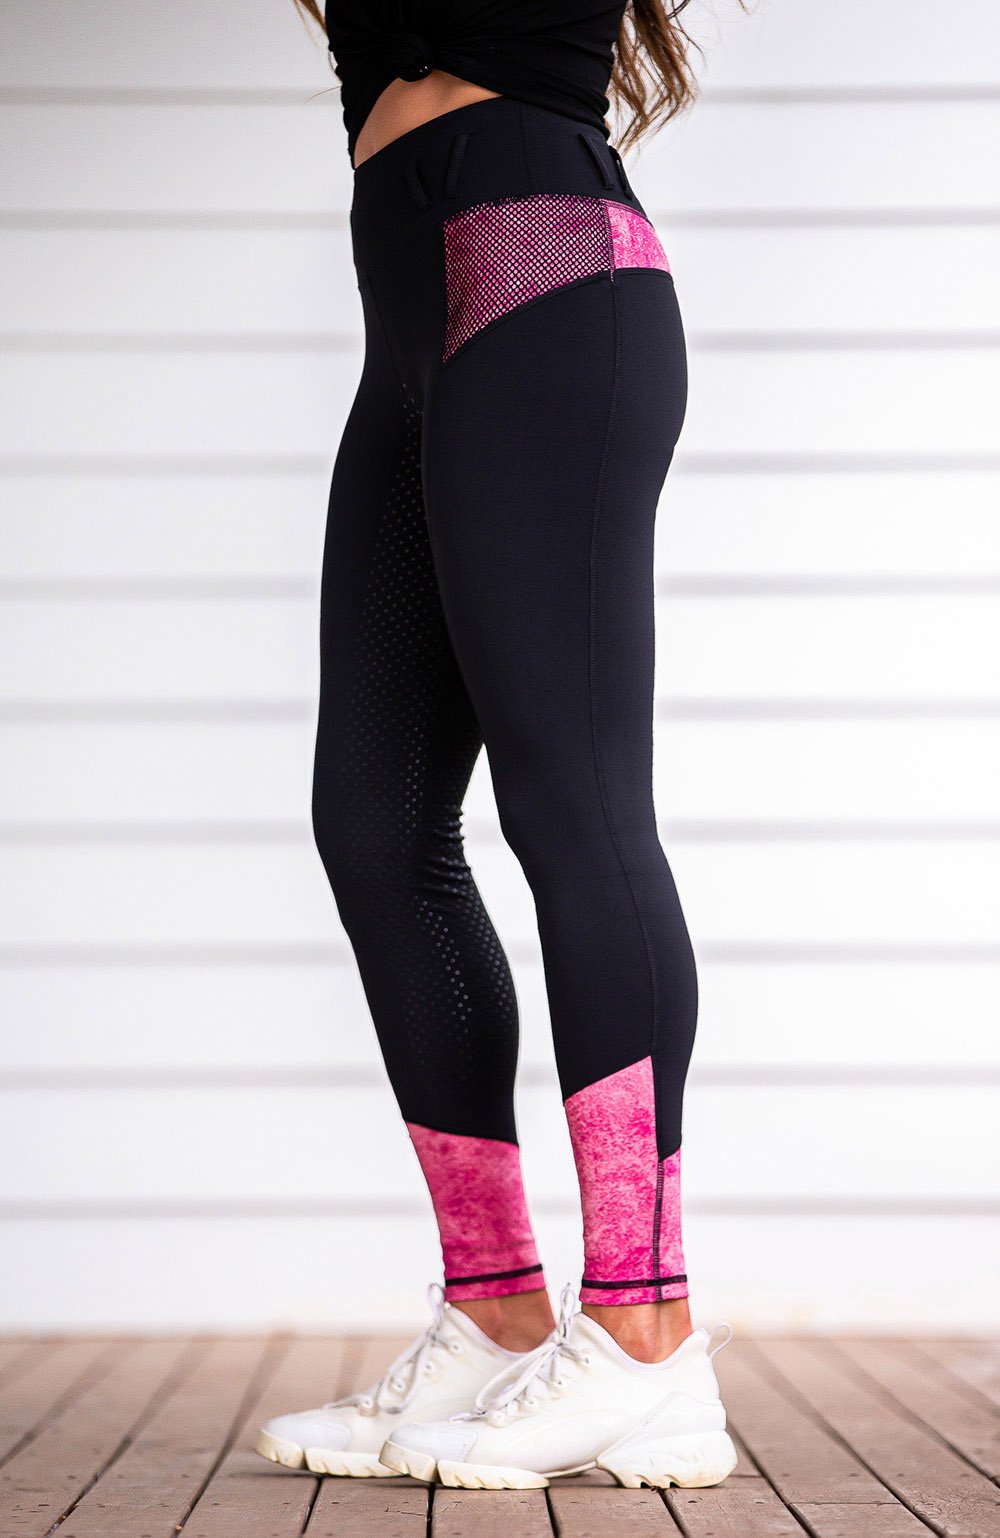 BARE Youth Performance Riding Tights - Miami Twist